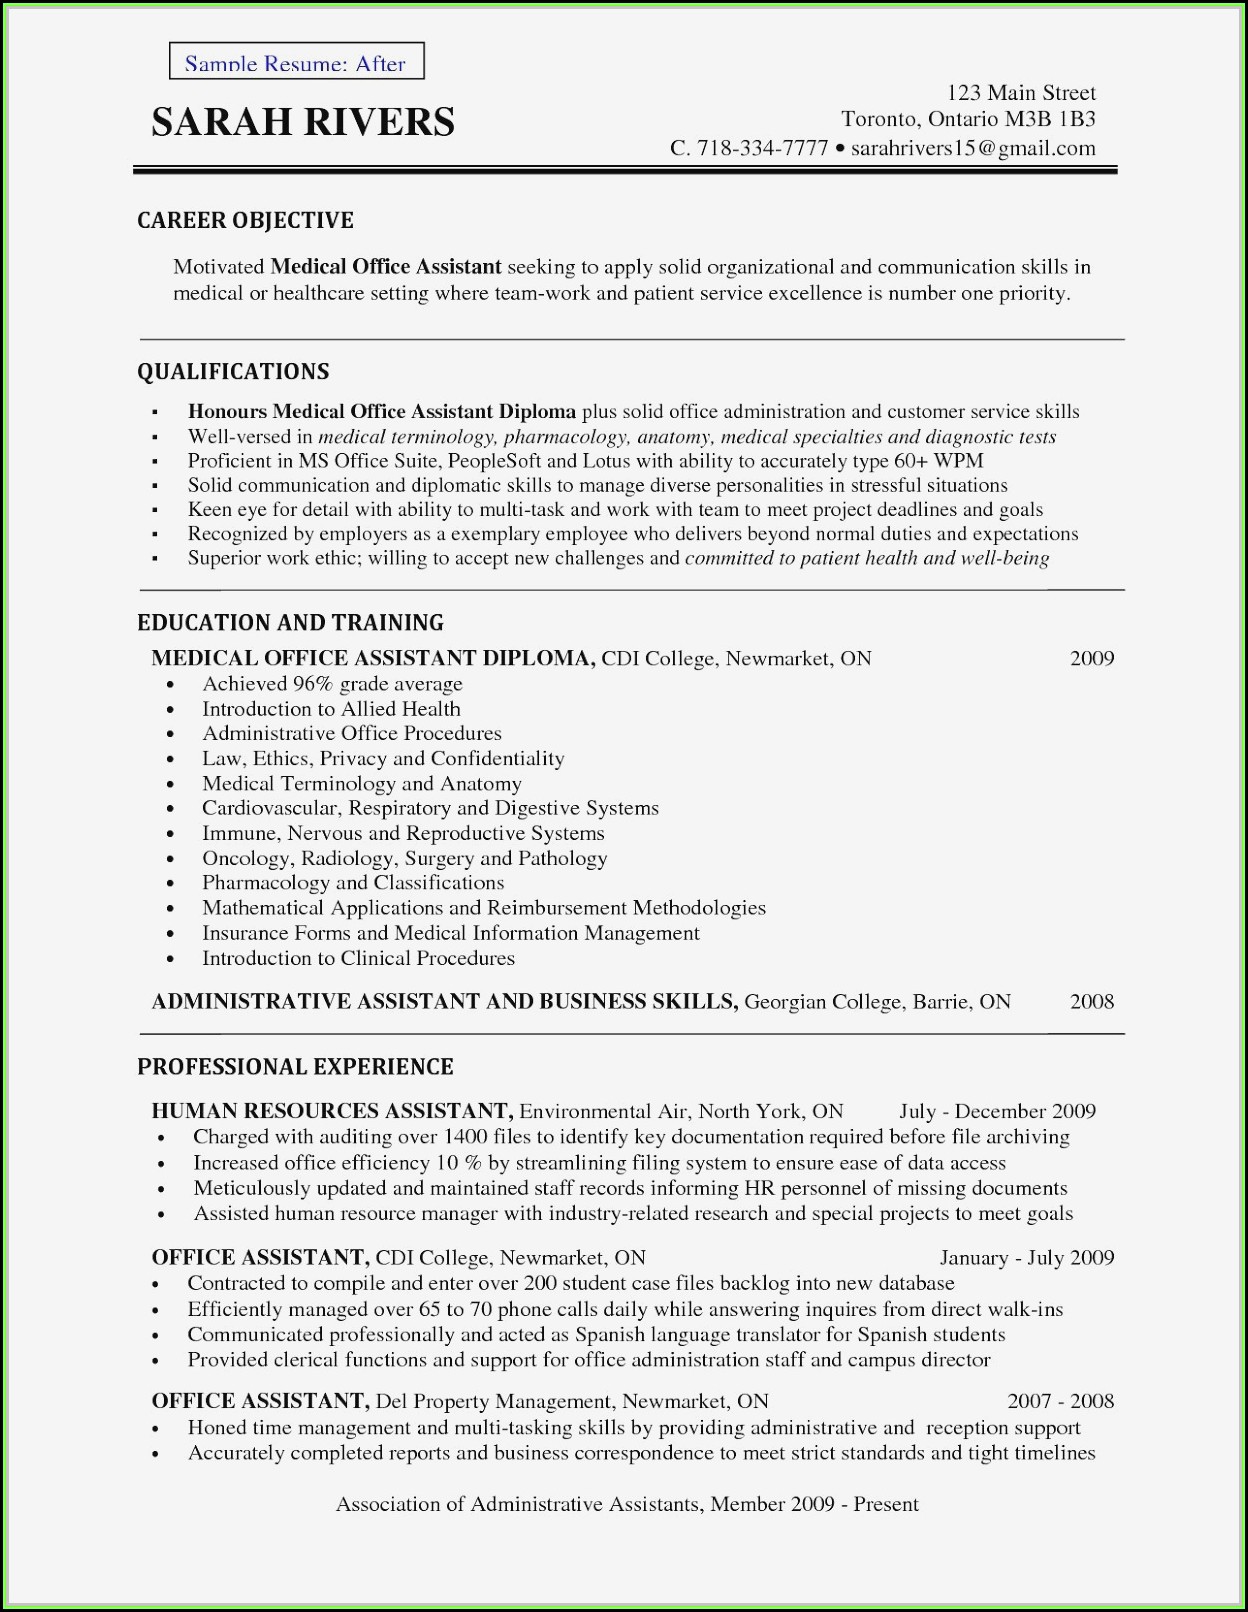 Professional resume writing services columbia sc